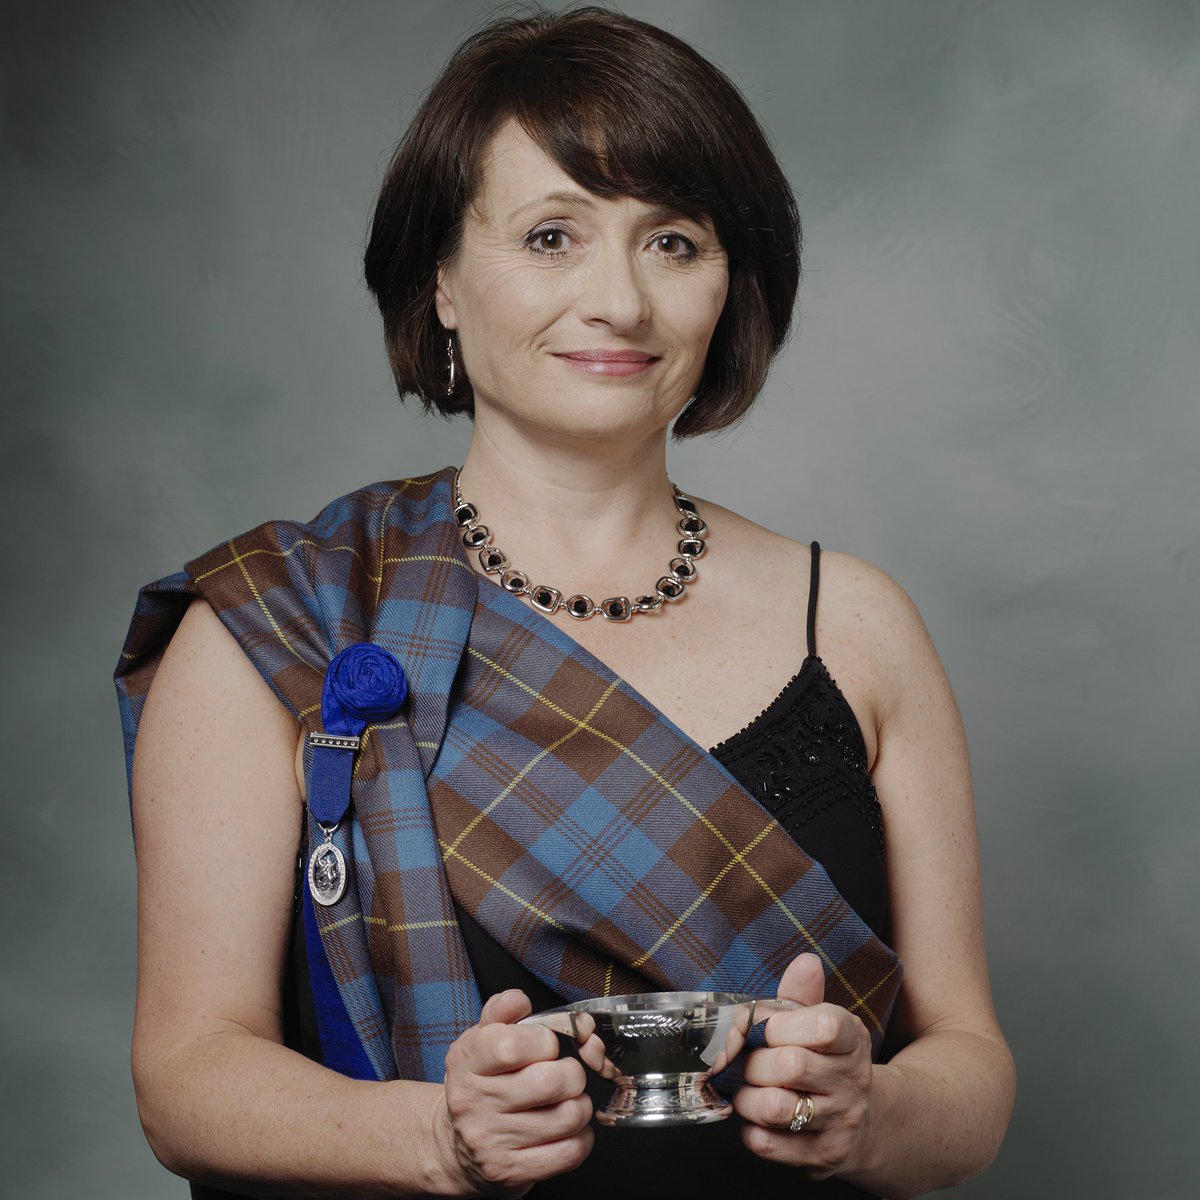 Today we raise a dram in honour of our Master Blender Dr. Rachel Barrie (@TheLadyBlender) who has been inducted as a ‘Keeper of the Quaich’, celebrating her exceptional contribution to Scotch Whisky. Read More: bddy.me/2ooY2zv #KeeperOfTheQuaich #Glenglassaugh